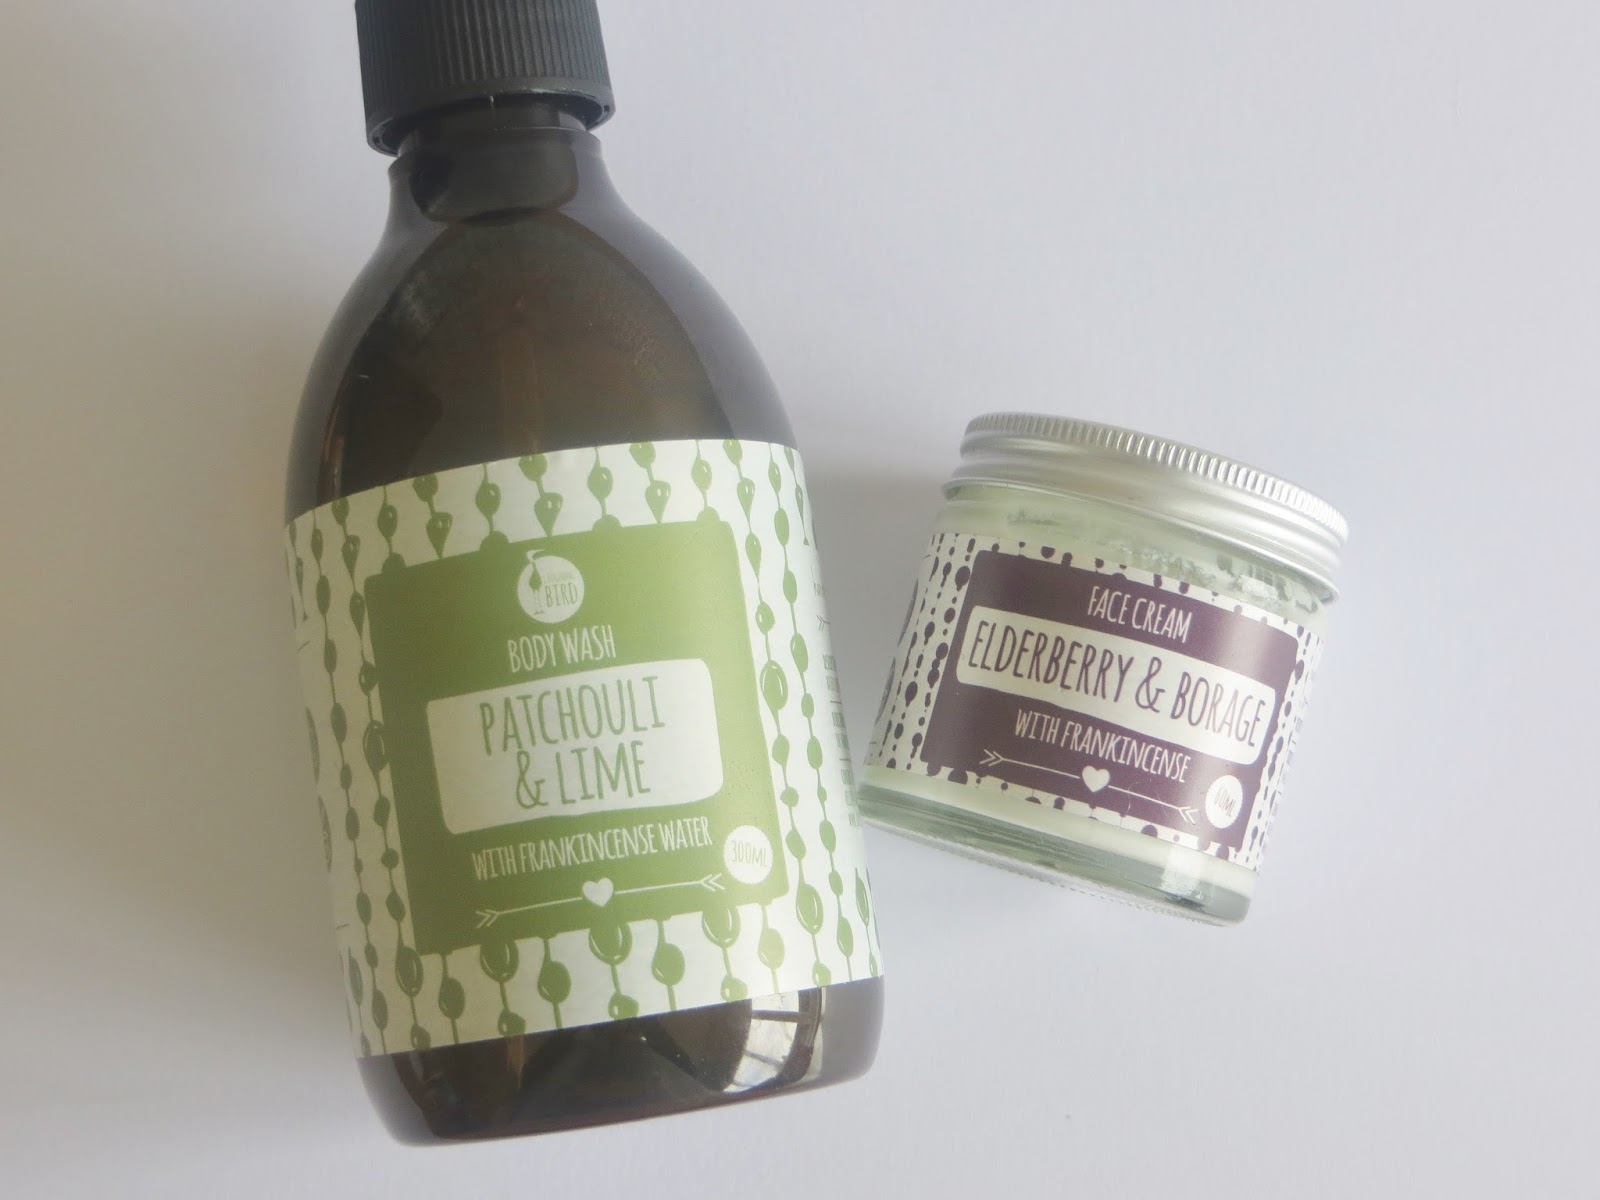 All natural body wash and face cream from Laughing Bird